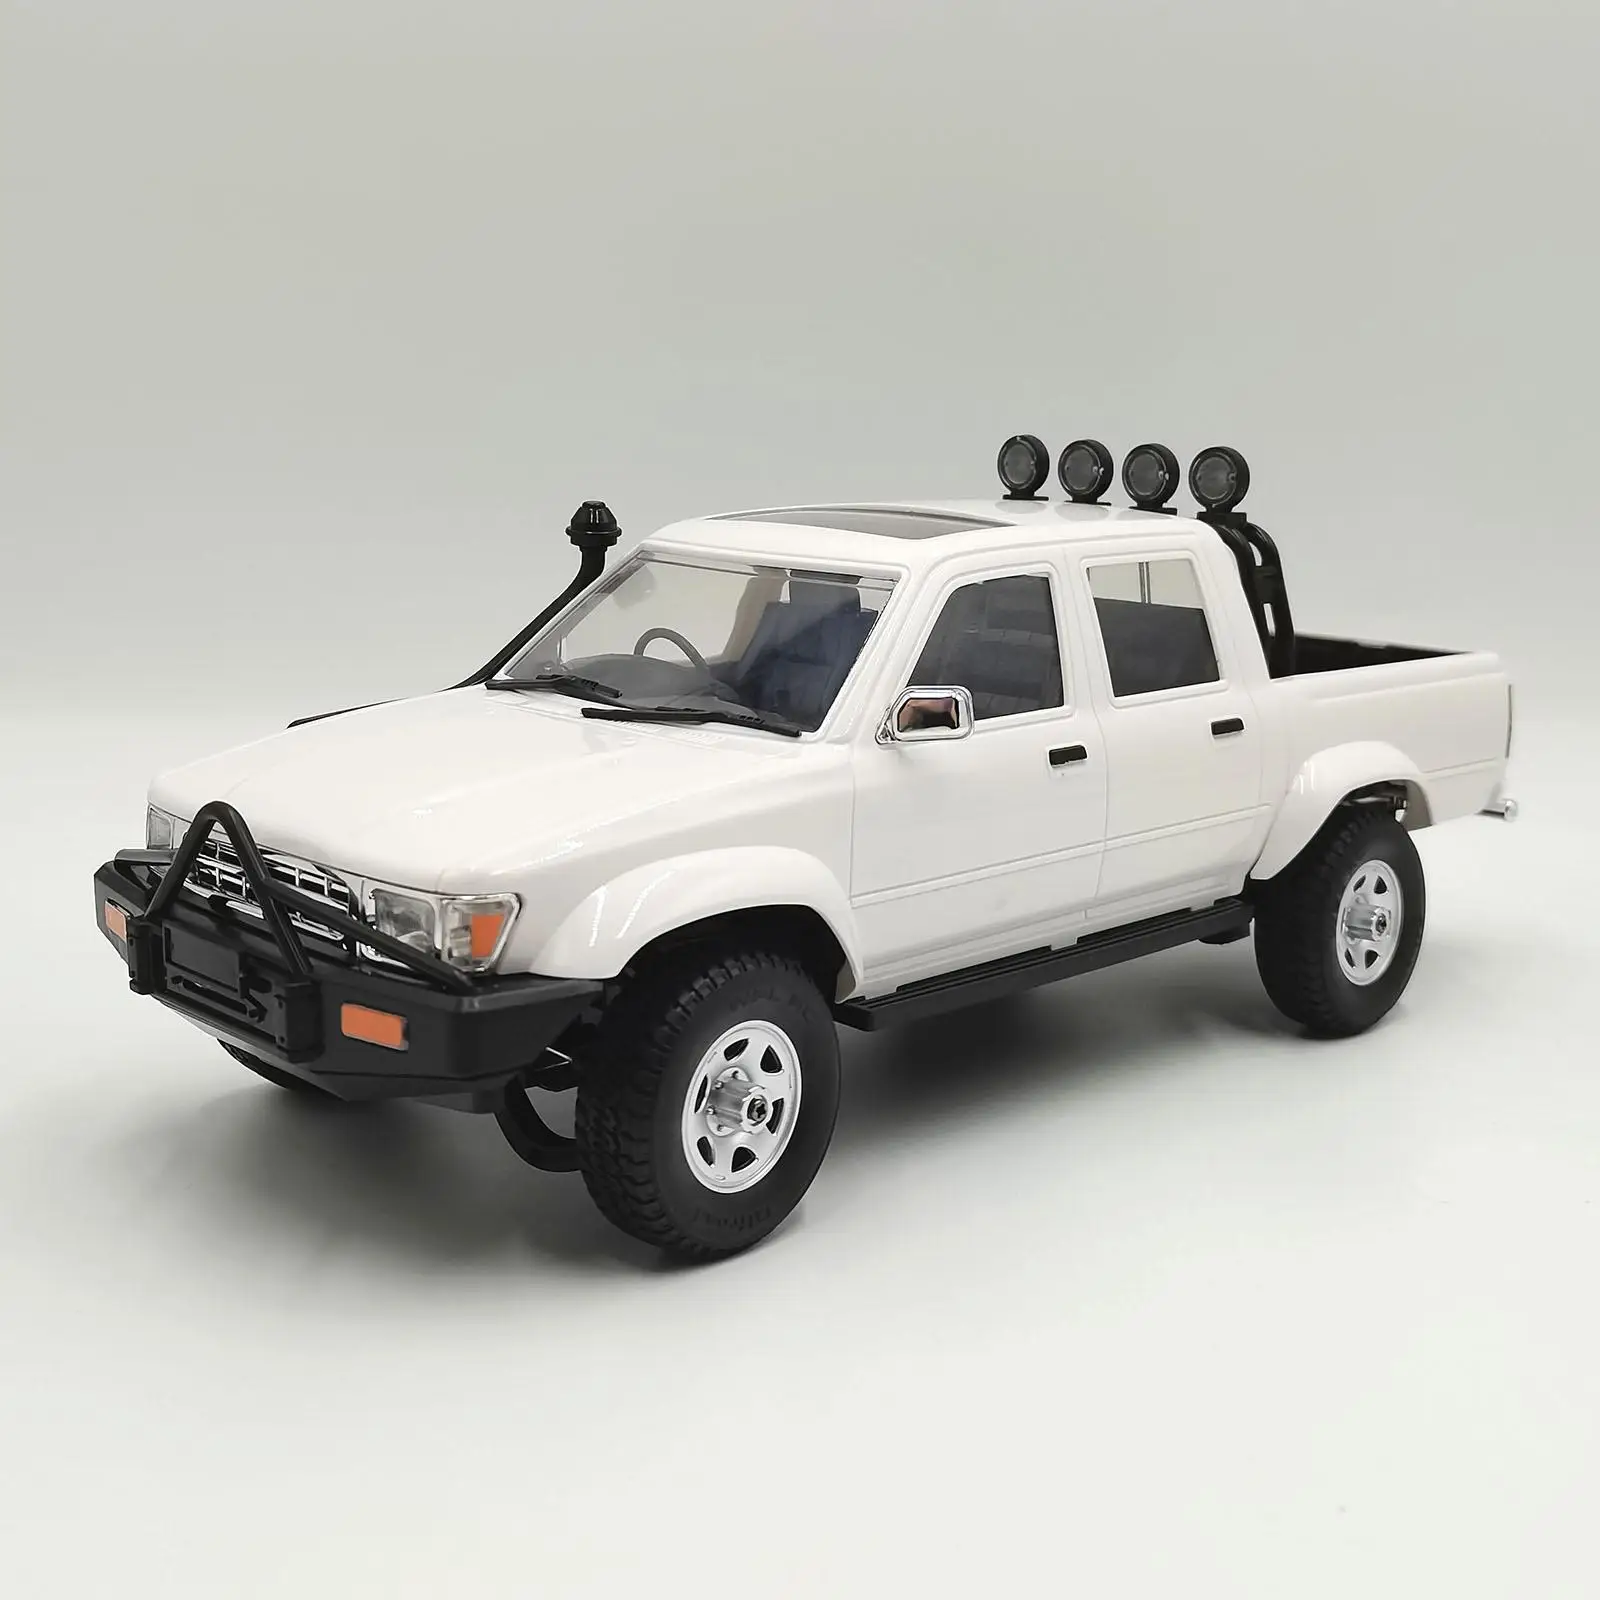 1/16 D62-1 RC Car Model Four Wheel Drive Vehicle with Headlights 1:16 Simulation RC Vehicles for Children Kids Girl Adults Gift